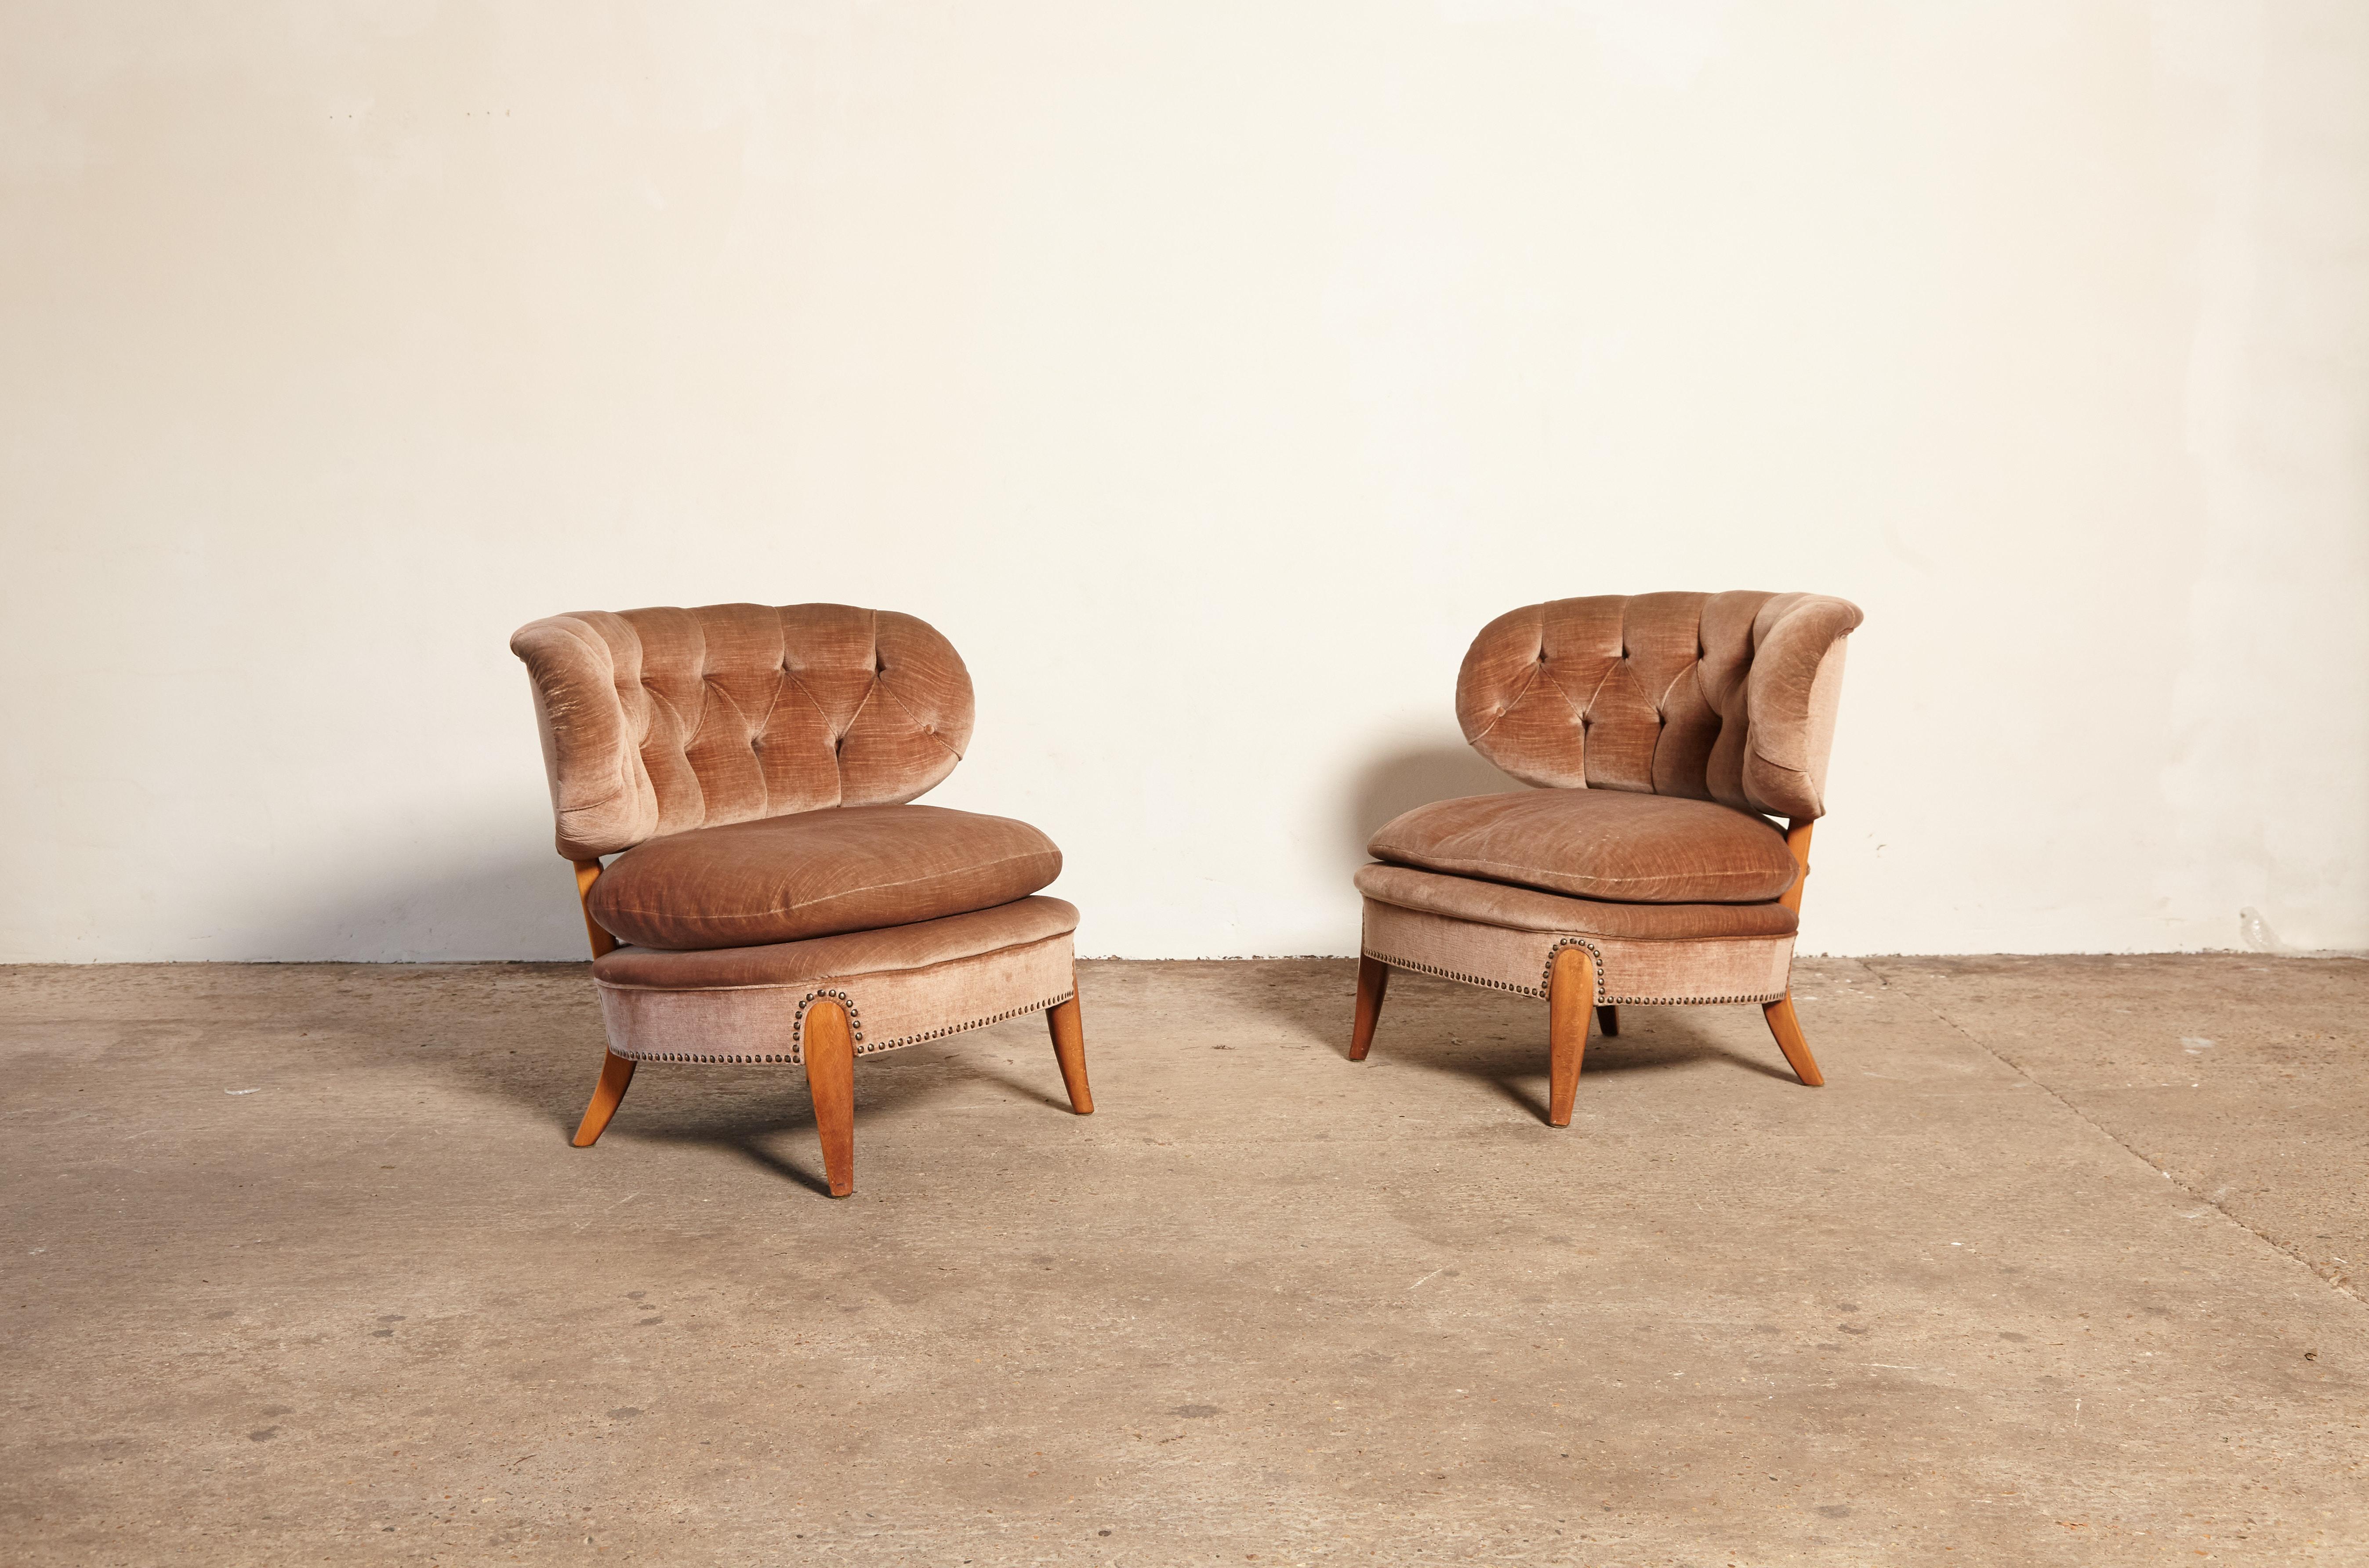 An original pair of Otto Schulz easy chairs, designed in the mid-1930s, and this pair produced in Sweden in the 1940s or 1950s. Upholstered in the original velvet / velour upholstery and finished with decorative brass nails. The color is accurately